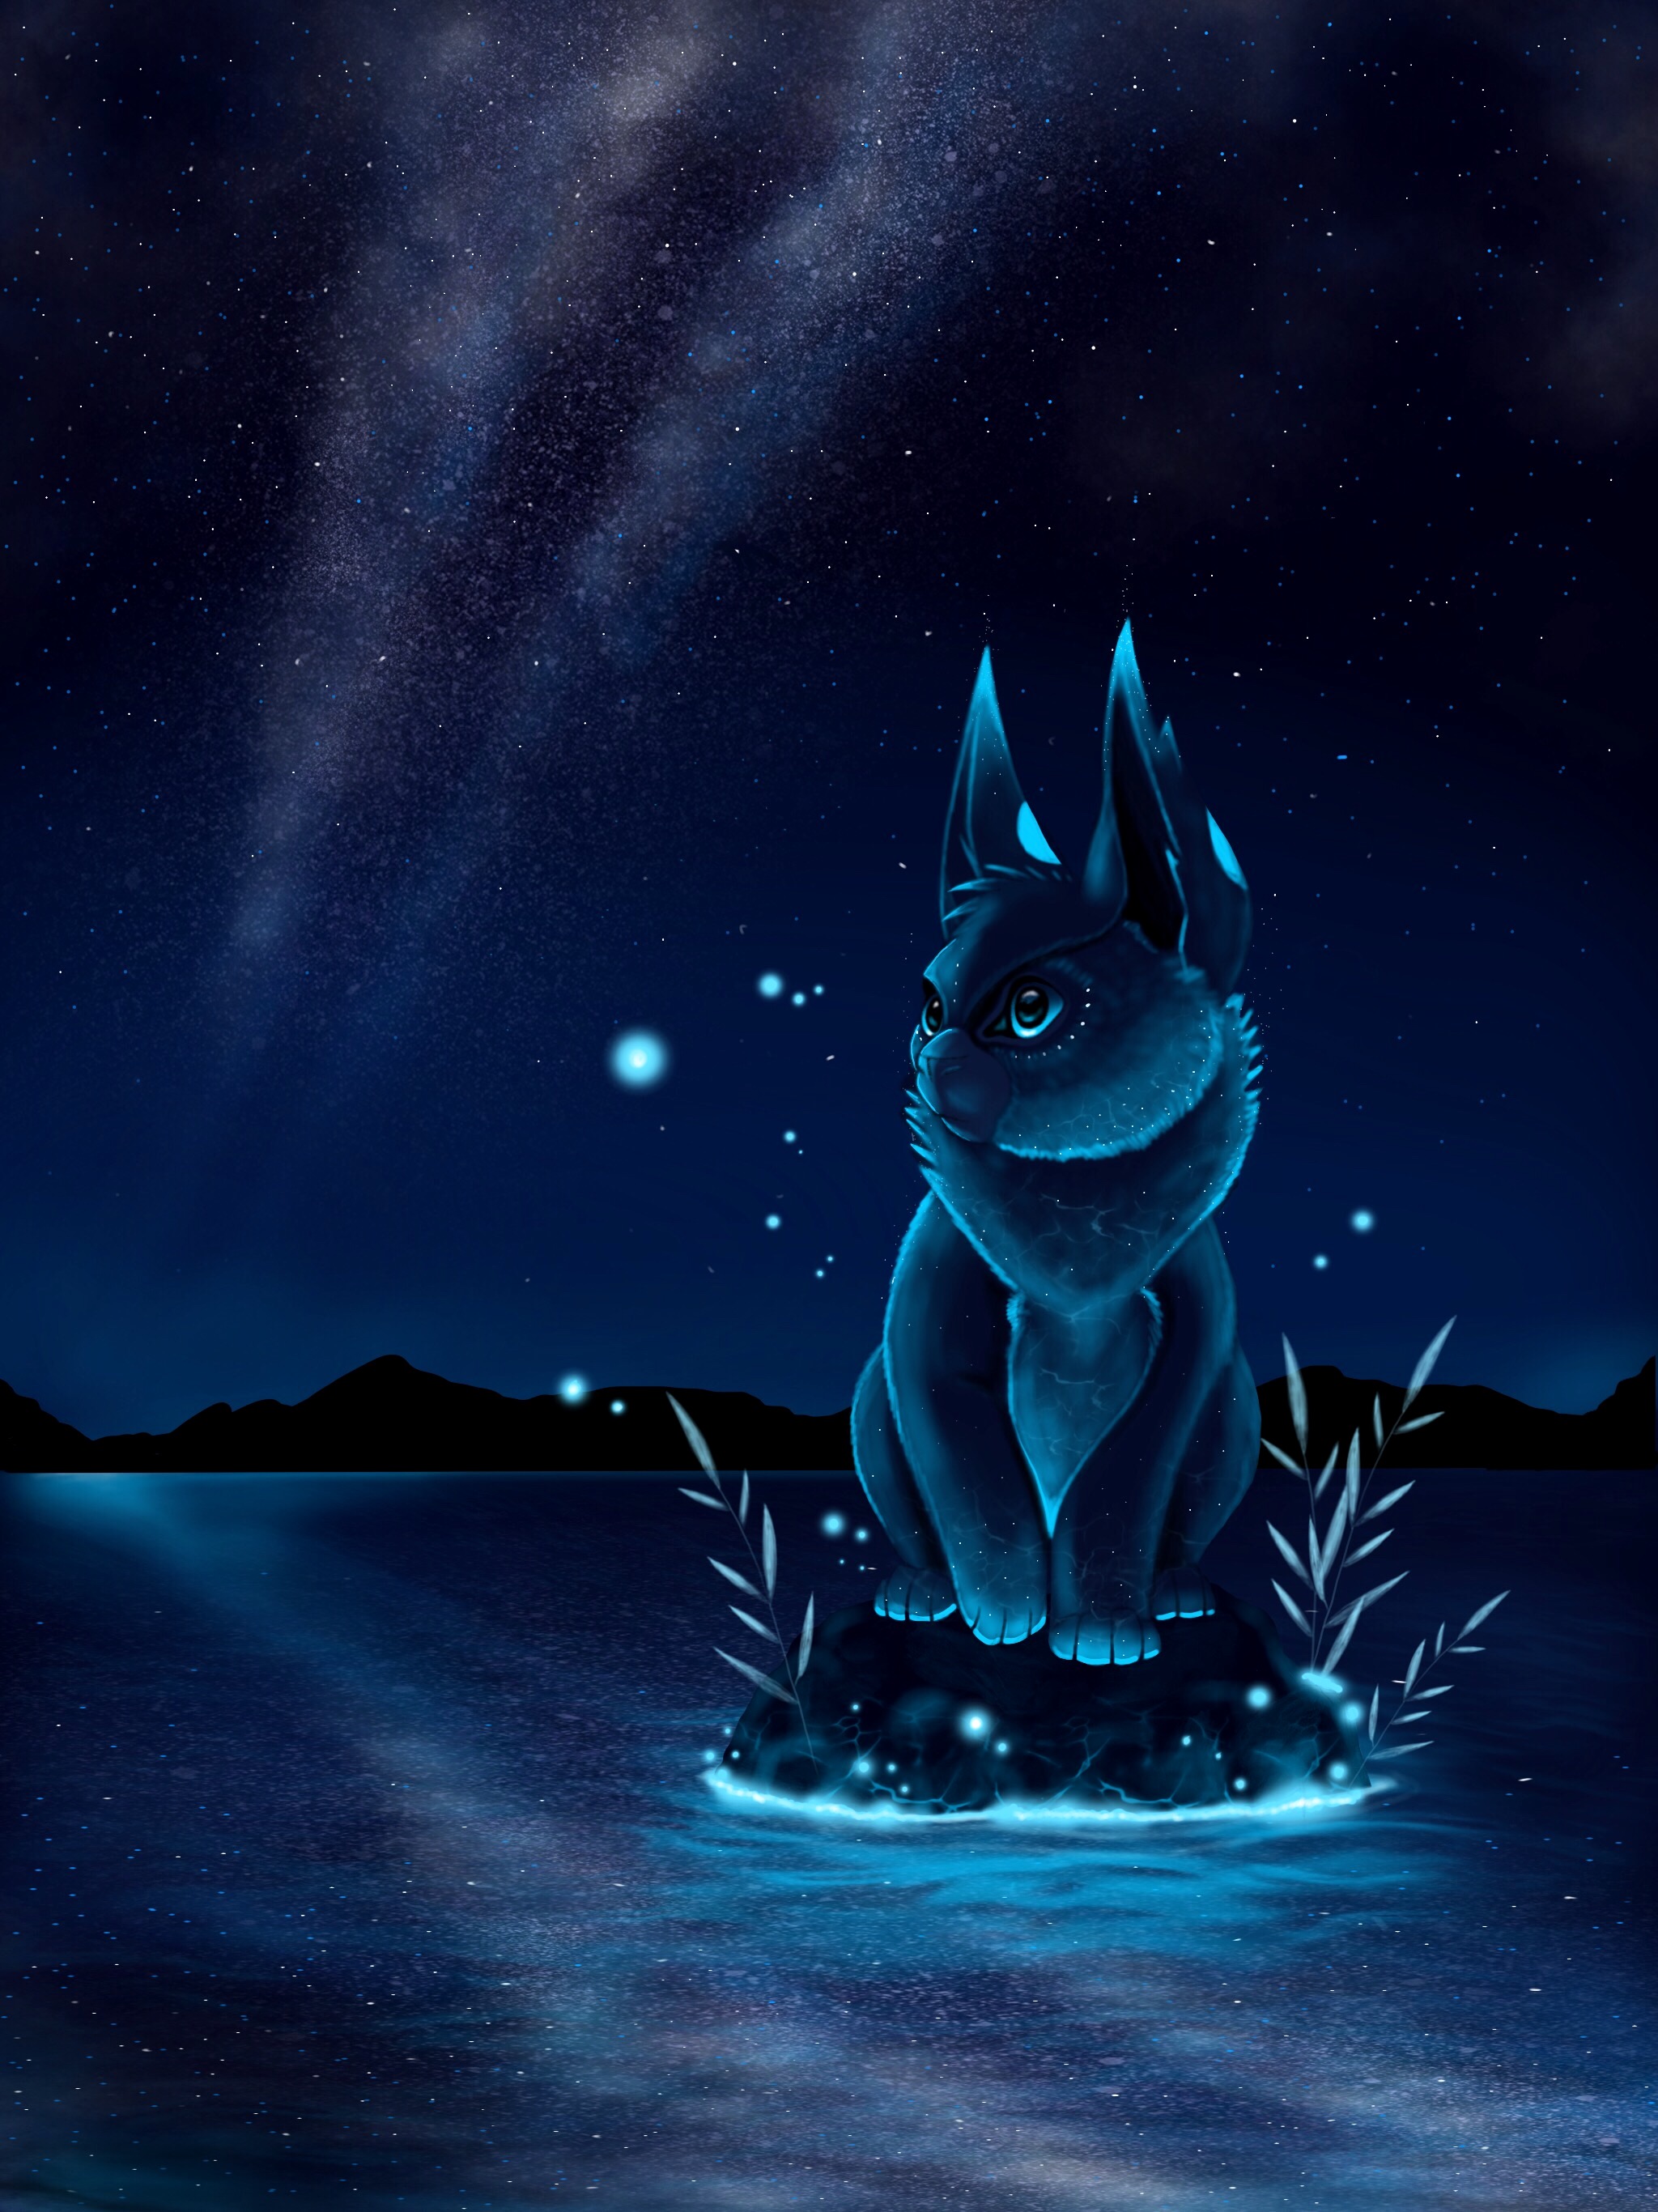 Cool Backgrounds night, art, starry sky, animal Fantastic